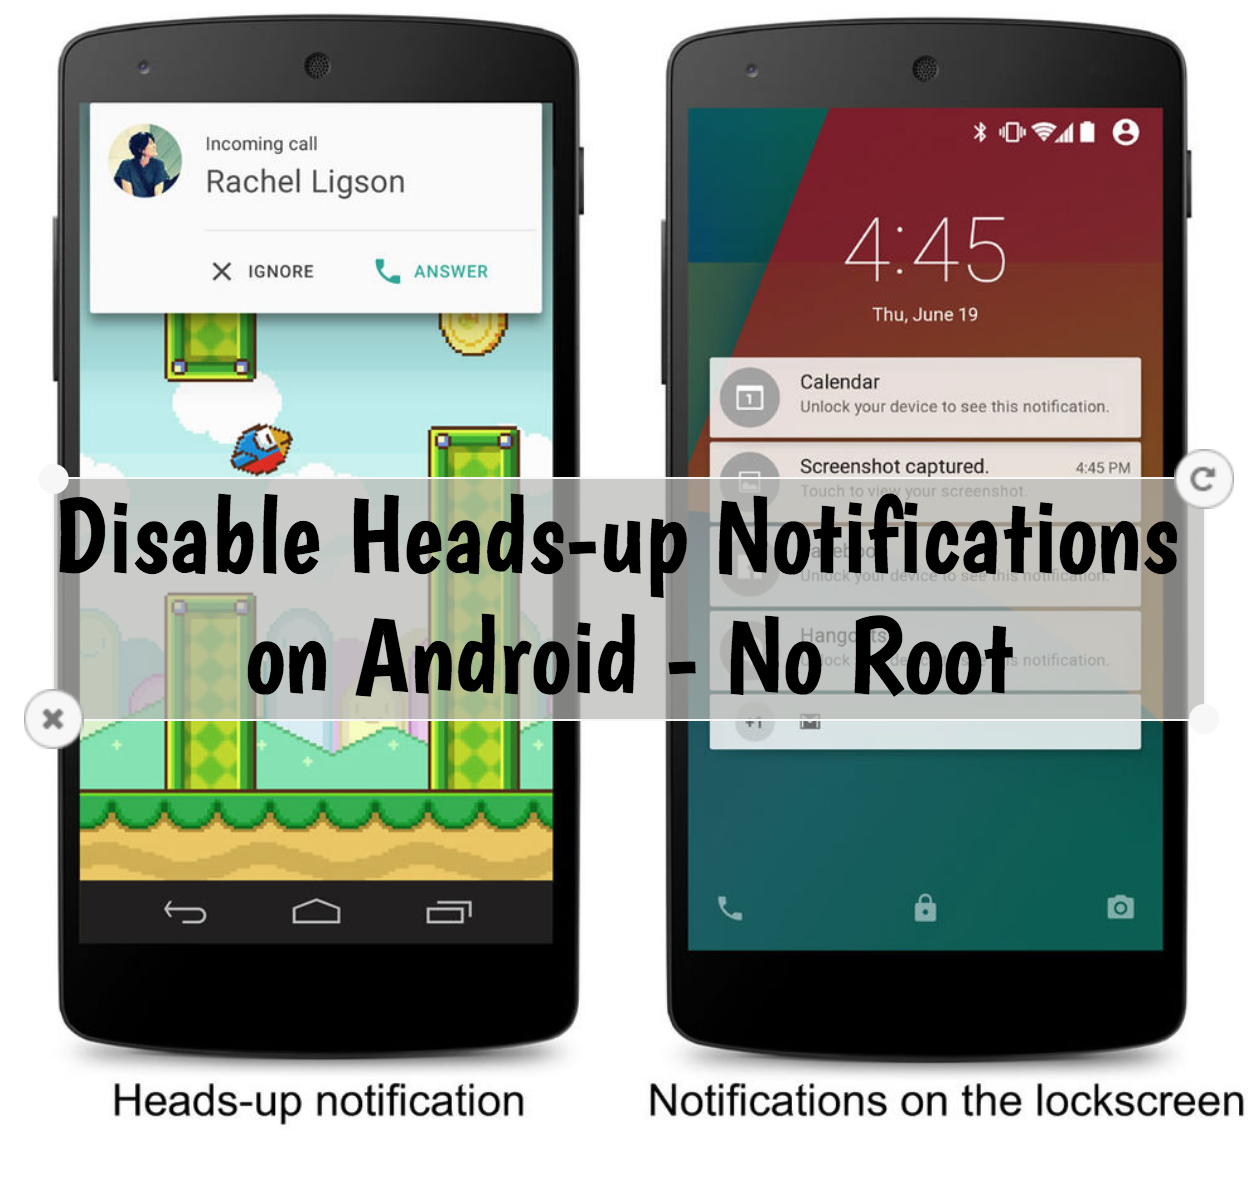 Disable Heads-up Notifications on Android